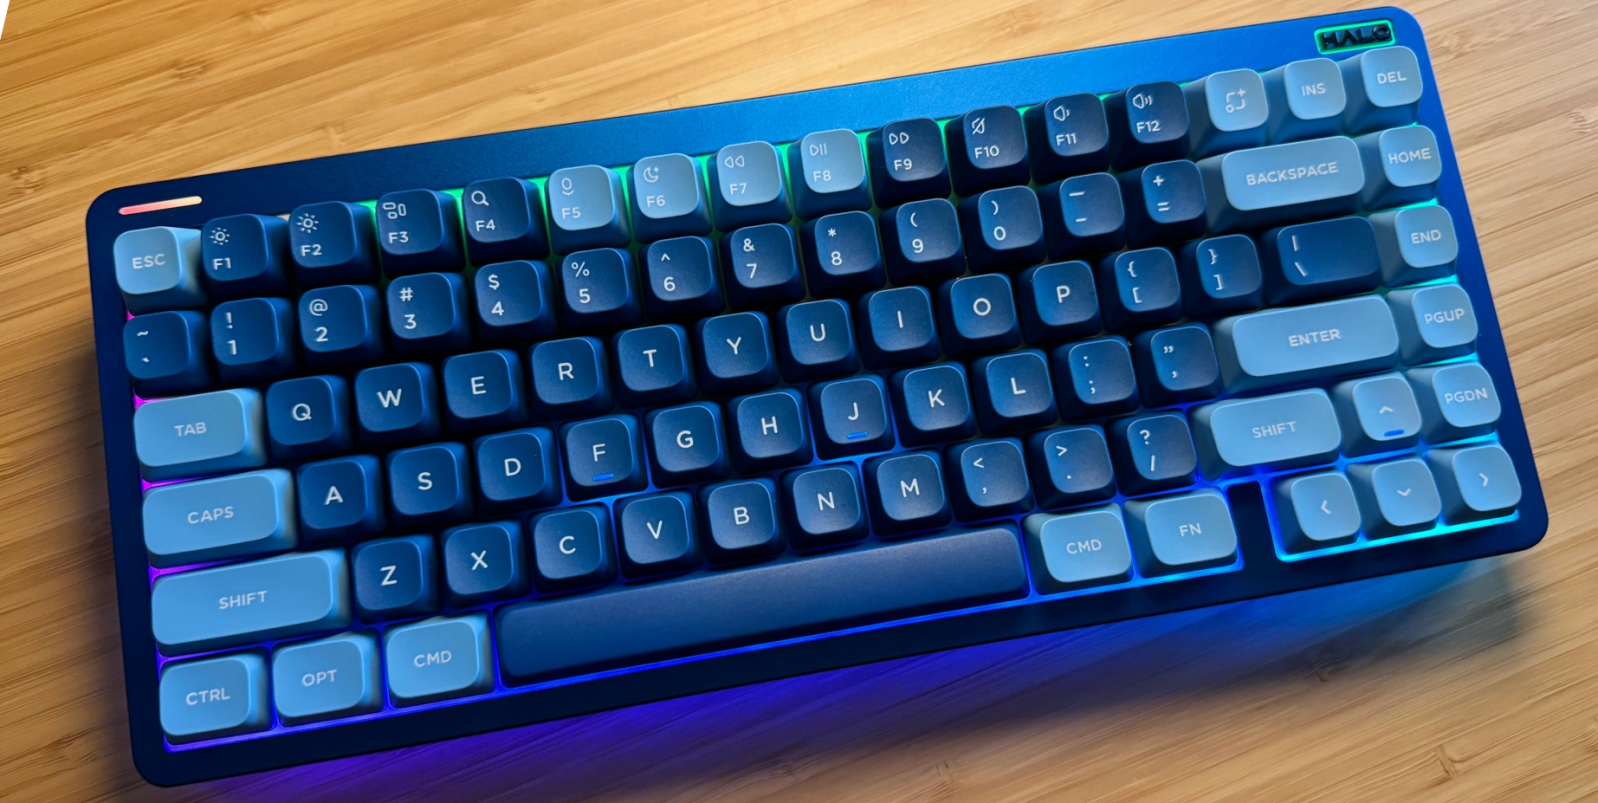 Review: NuPhy Halo75 V2 mechanical keyboard is a light show of fun for your Mac